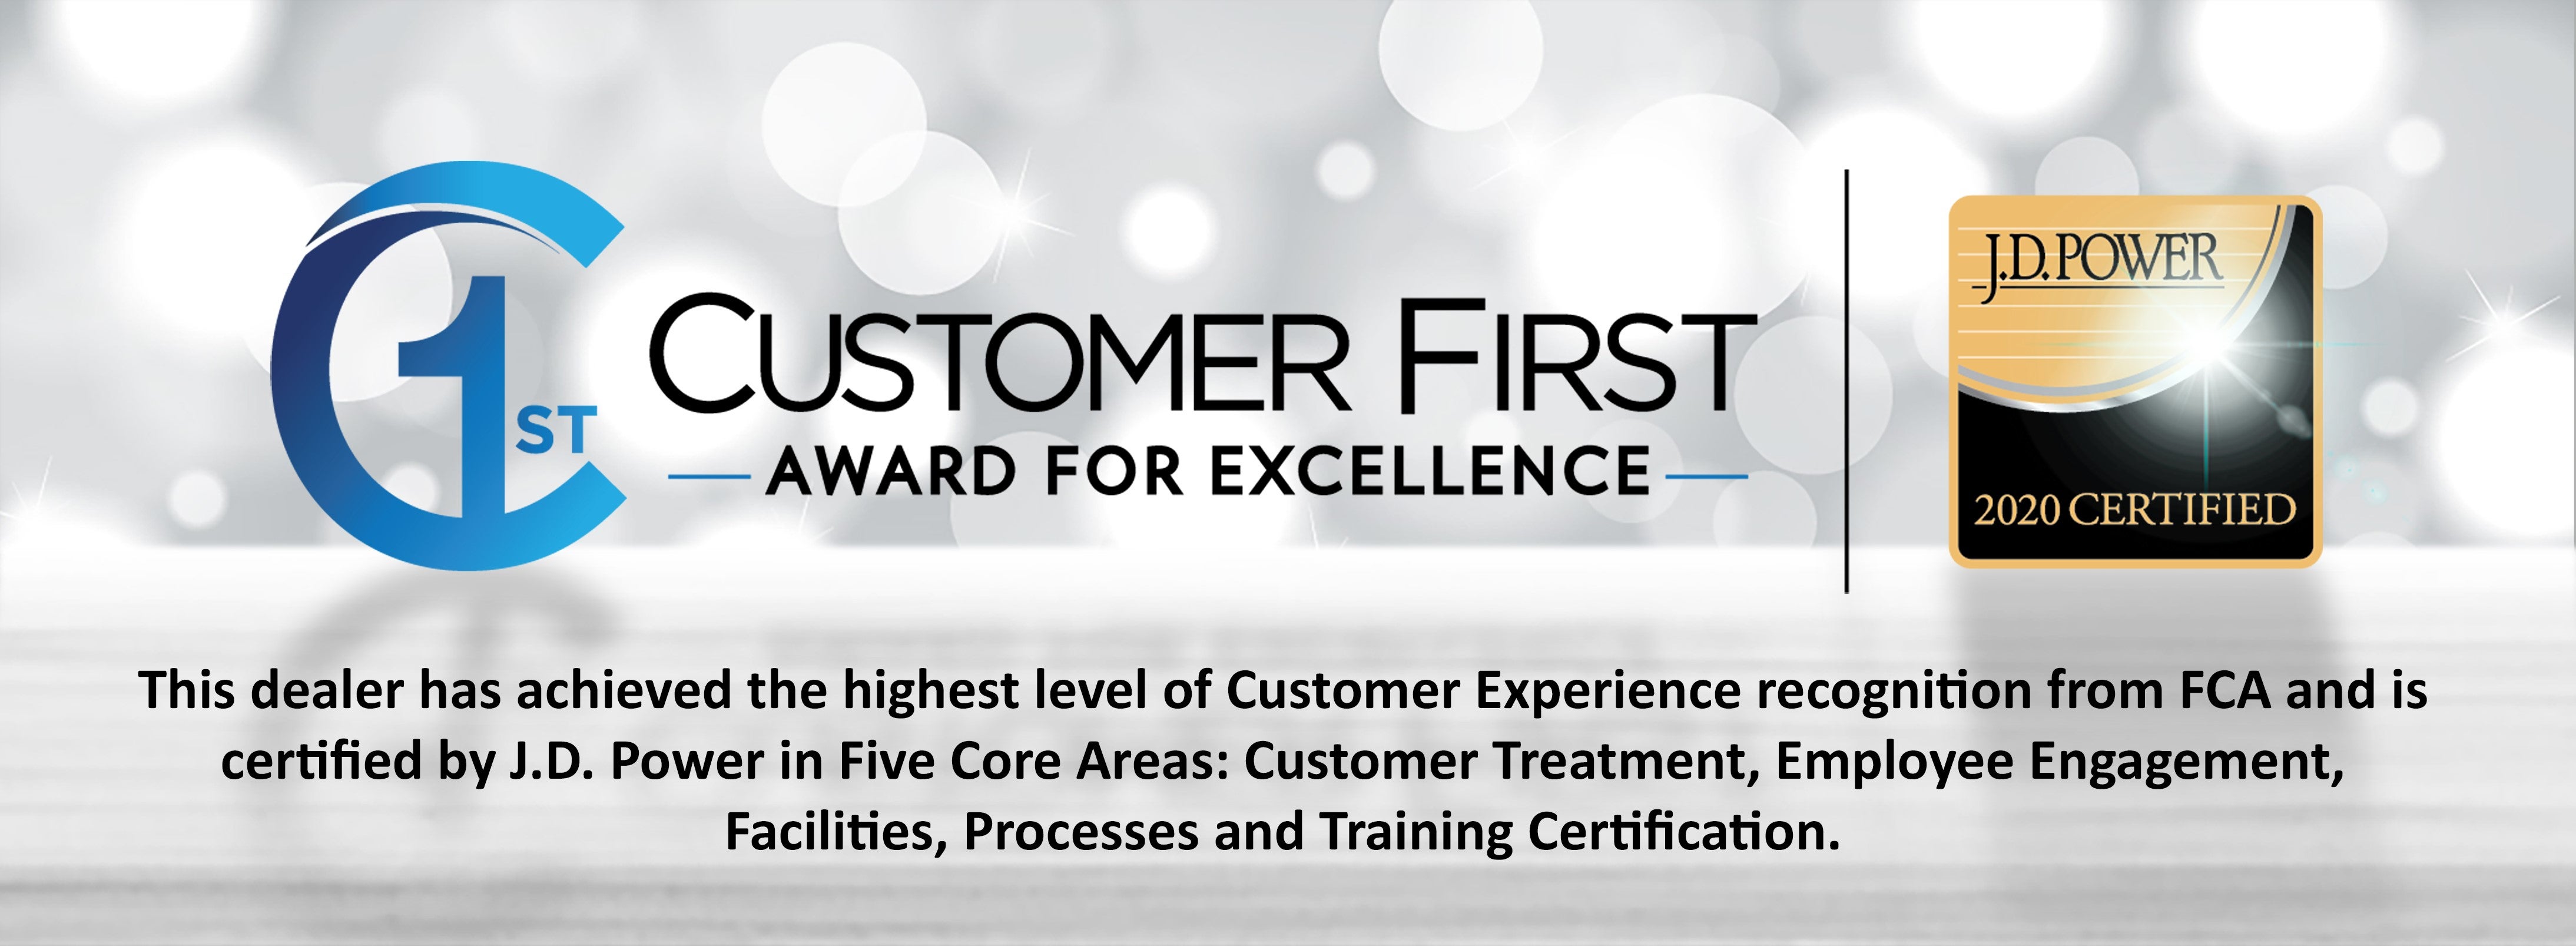 Customer First Award for Excellence for 2019 at Vande Hey Brantmeier Chrysler Dodge Jeep Ram in Chilton, WI